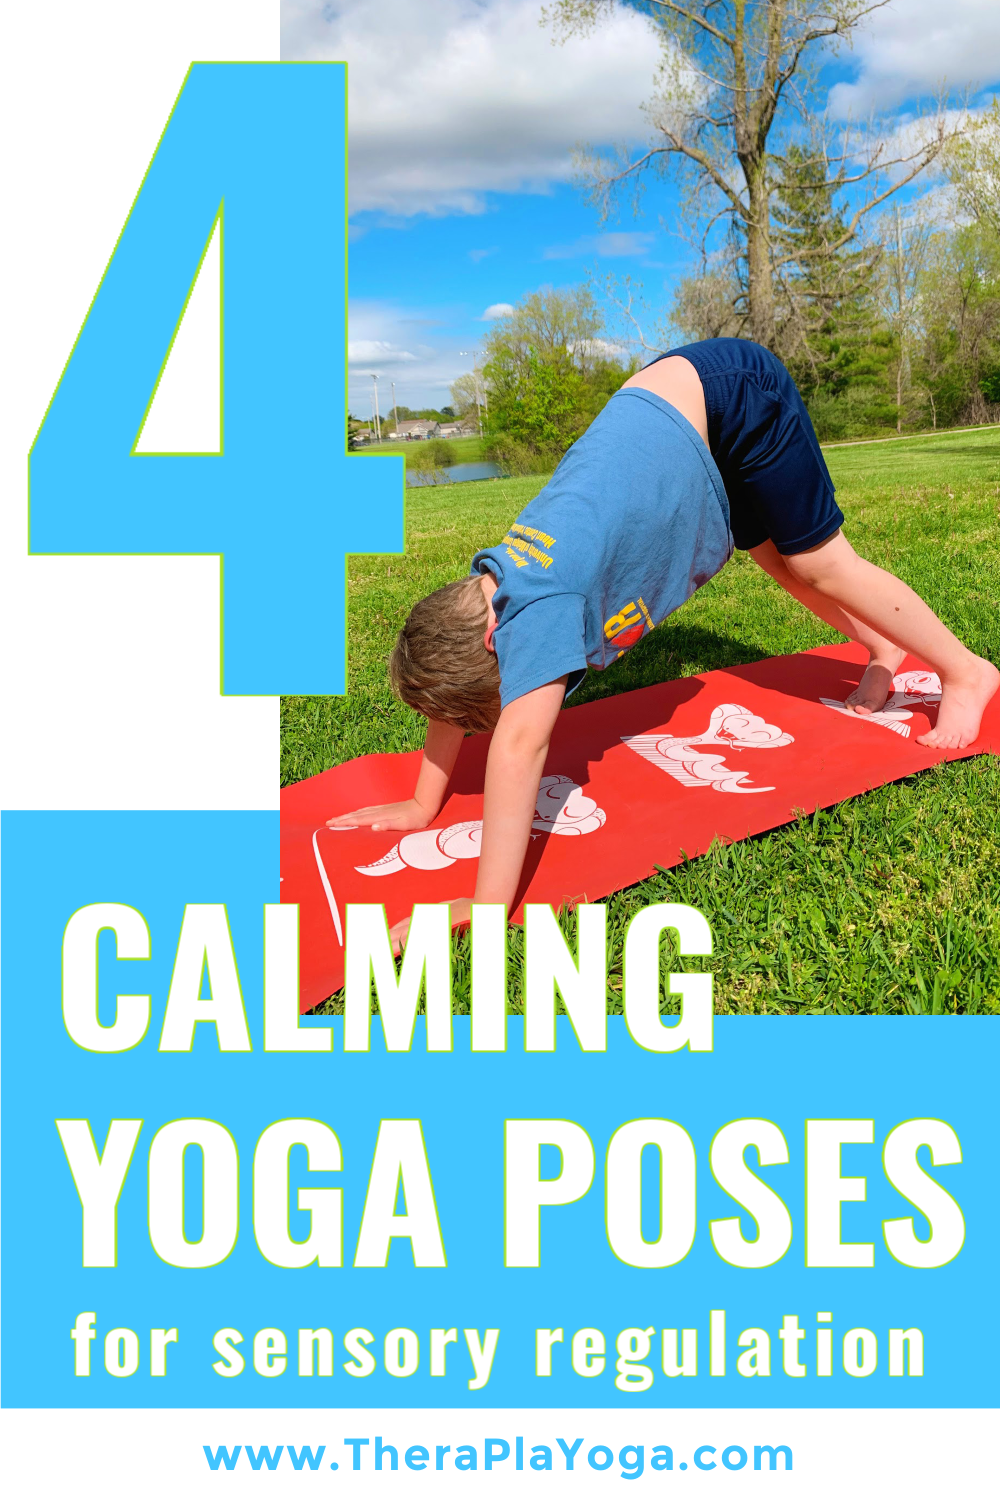 10 Relaxing Yoga Poses for Busy Moms - My Little Moppet